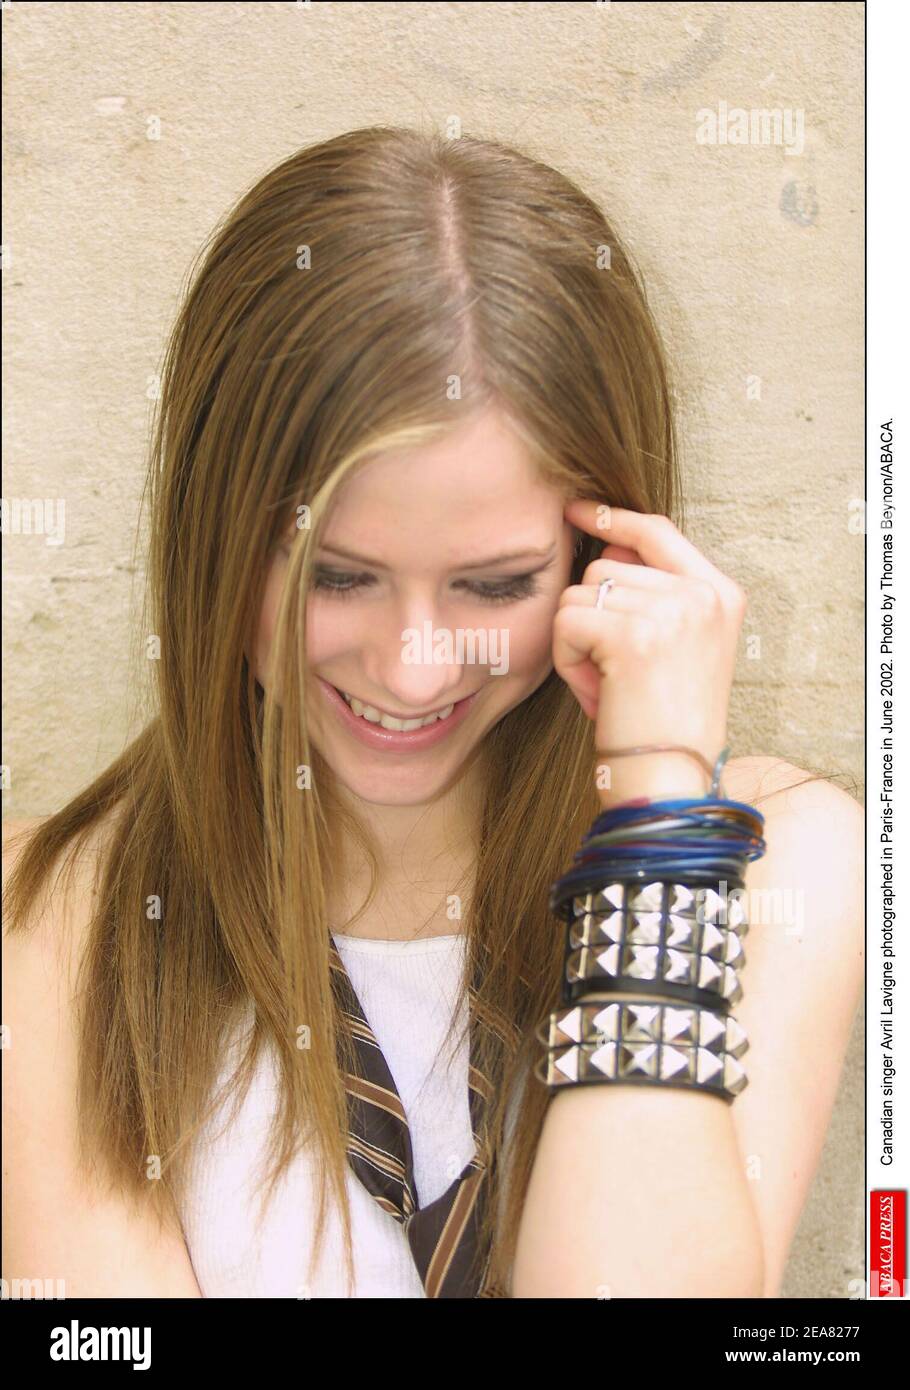 Canadian singer Avril Lavigne photographed in Paris-France in June 2002.  Photo by Thomas Beynon/ABACA Stock Photo - Alamy